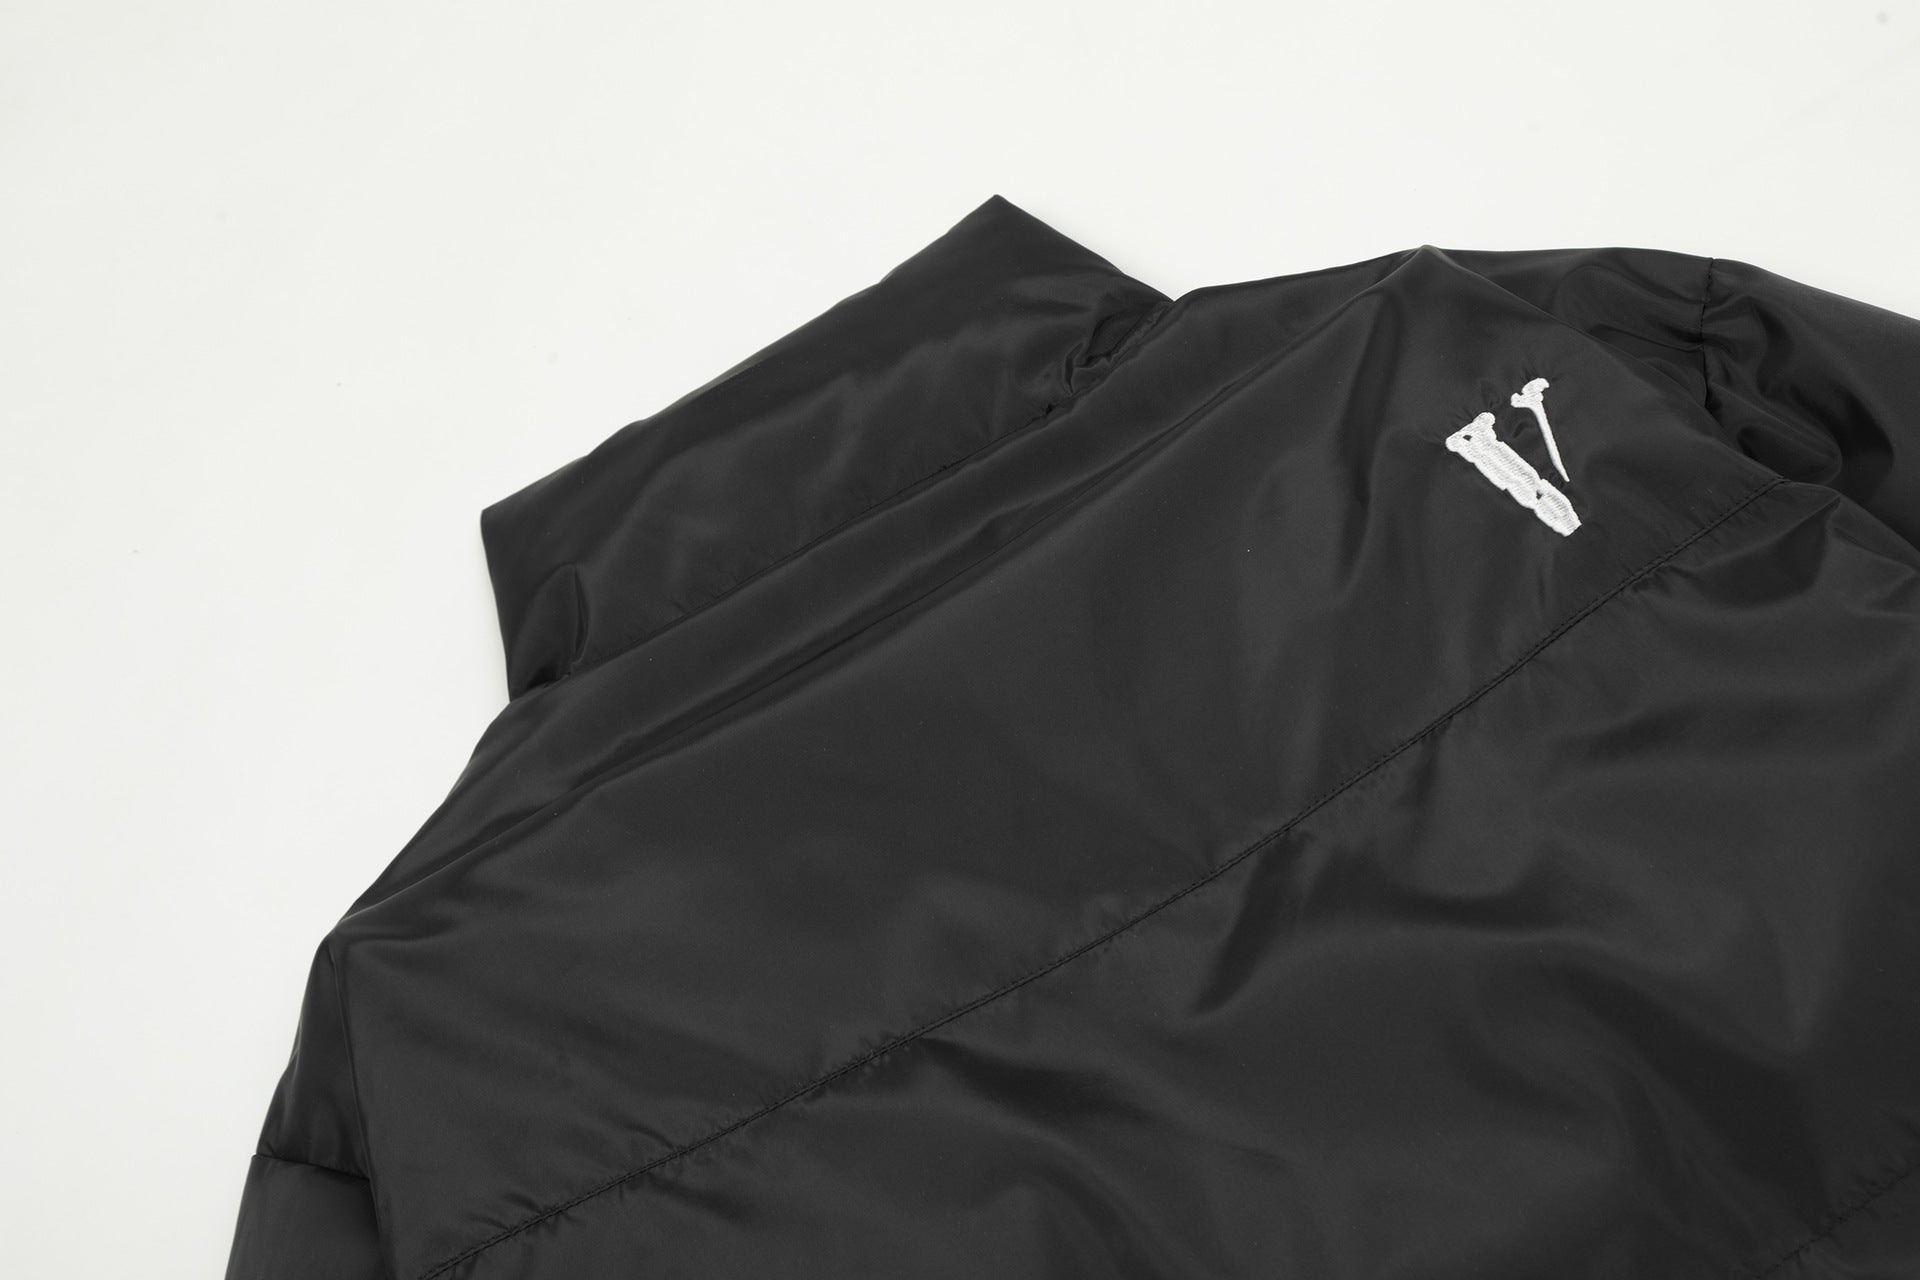 VLONE solid color stand collar cotton jacket